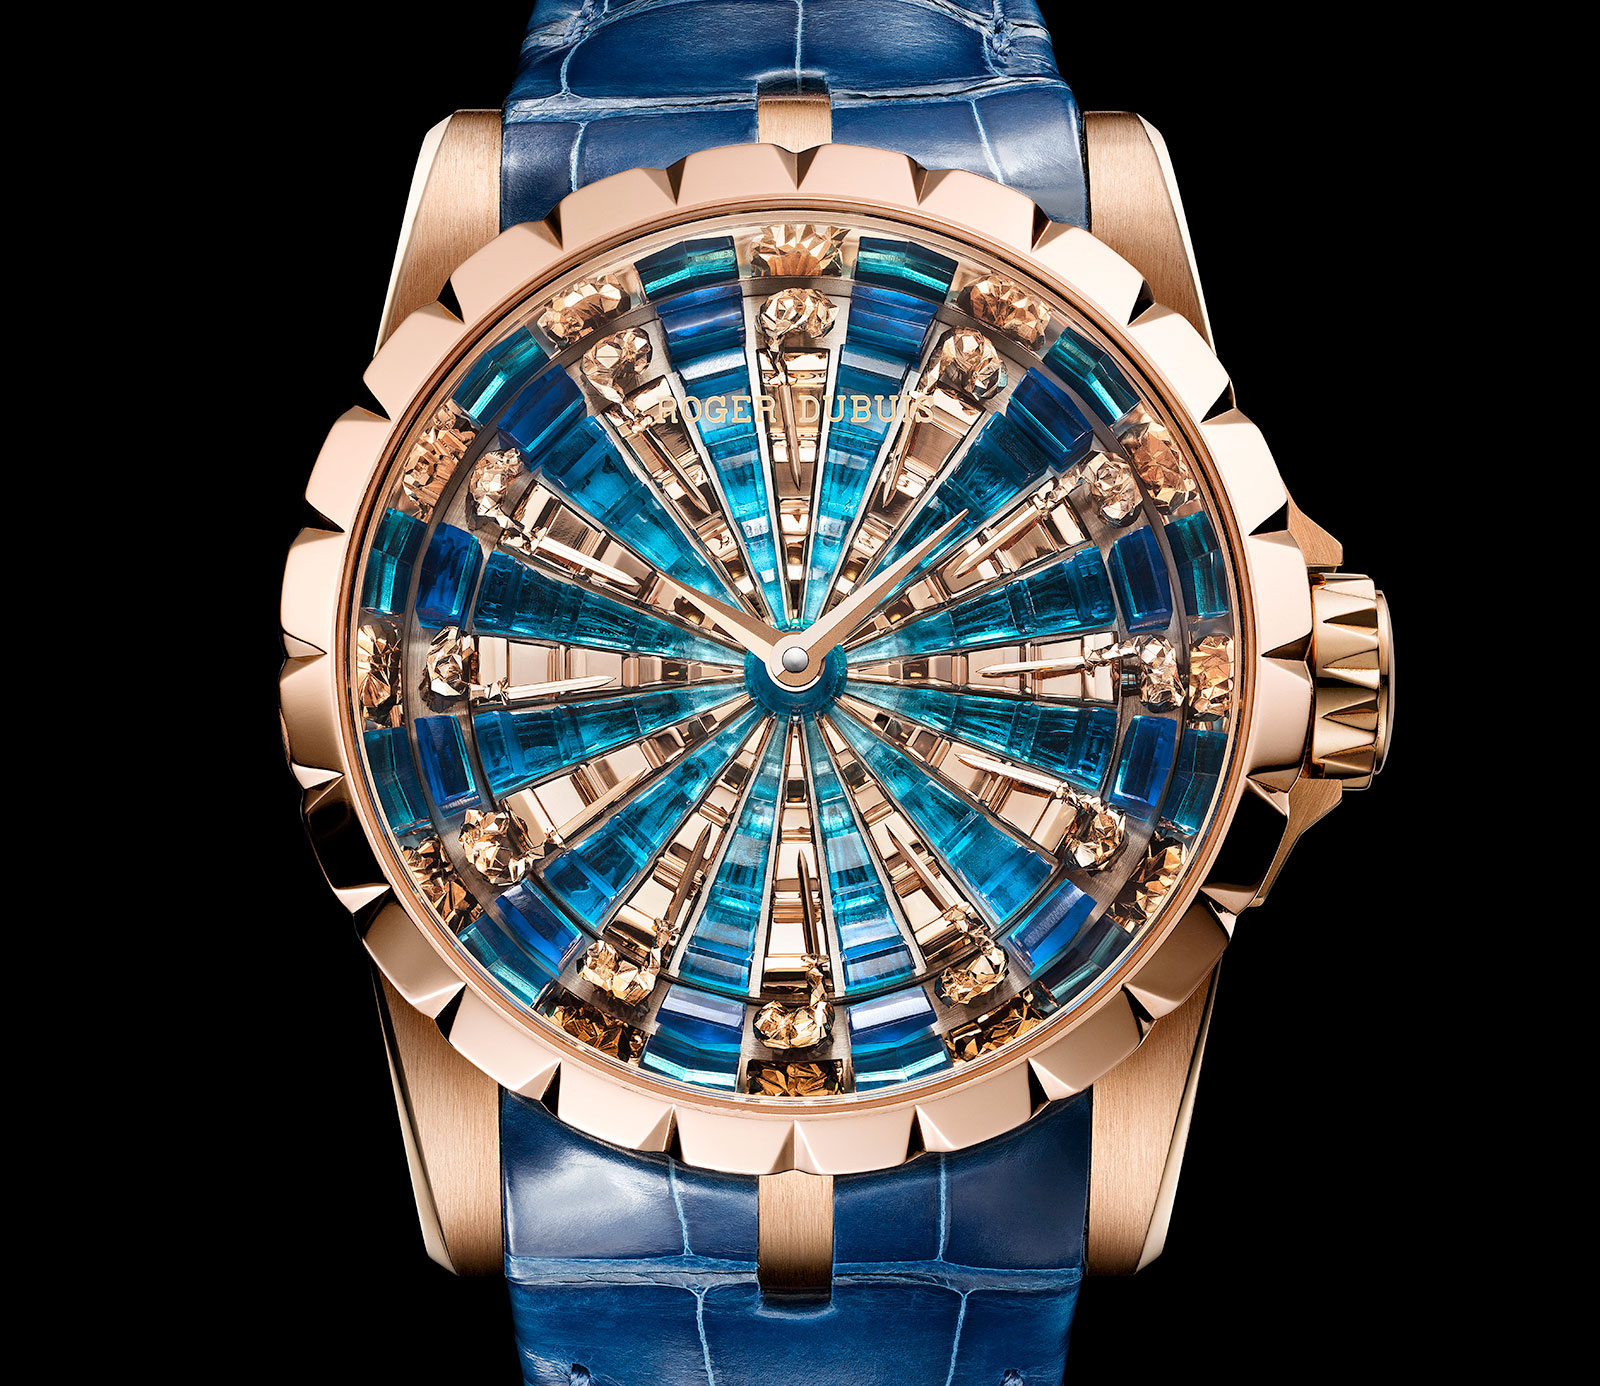 Roger Dubuis Knights of the Round Table III-3